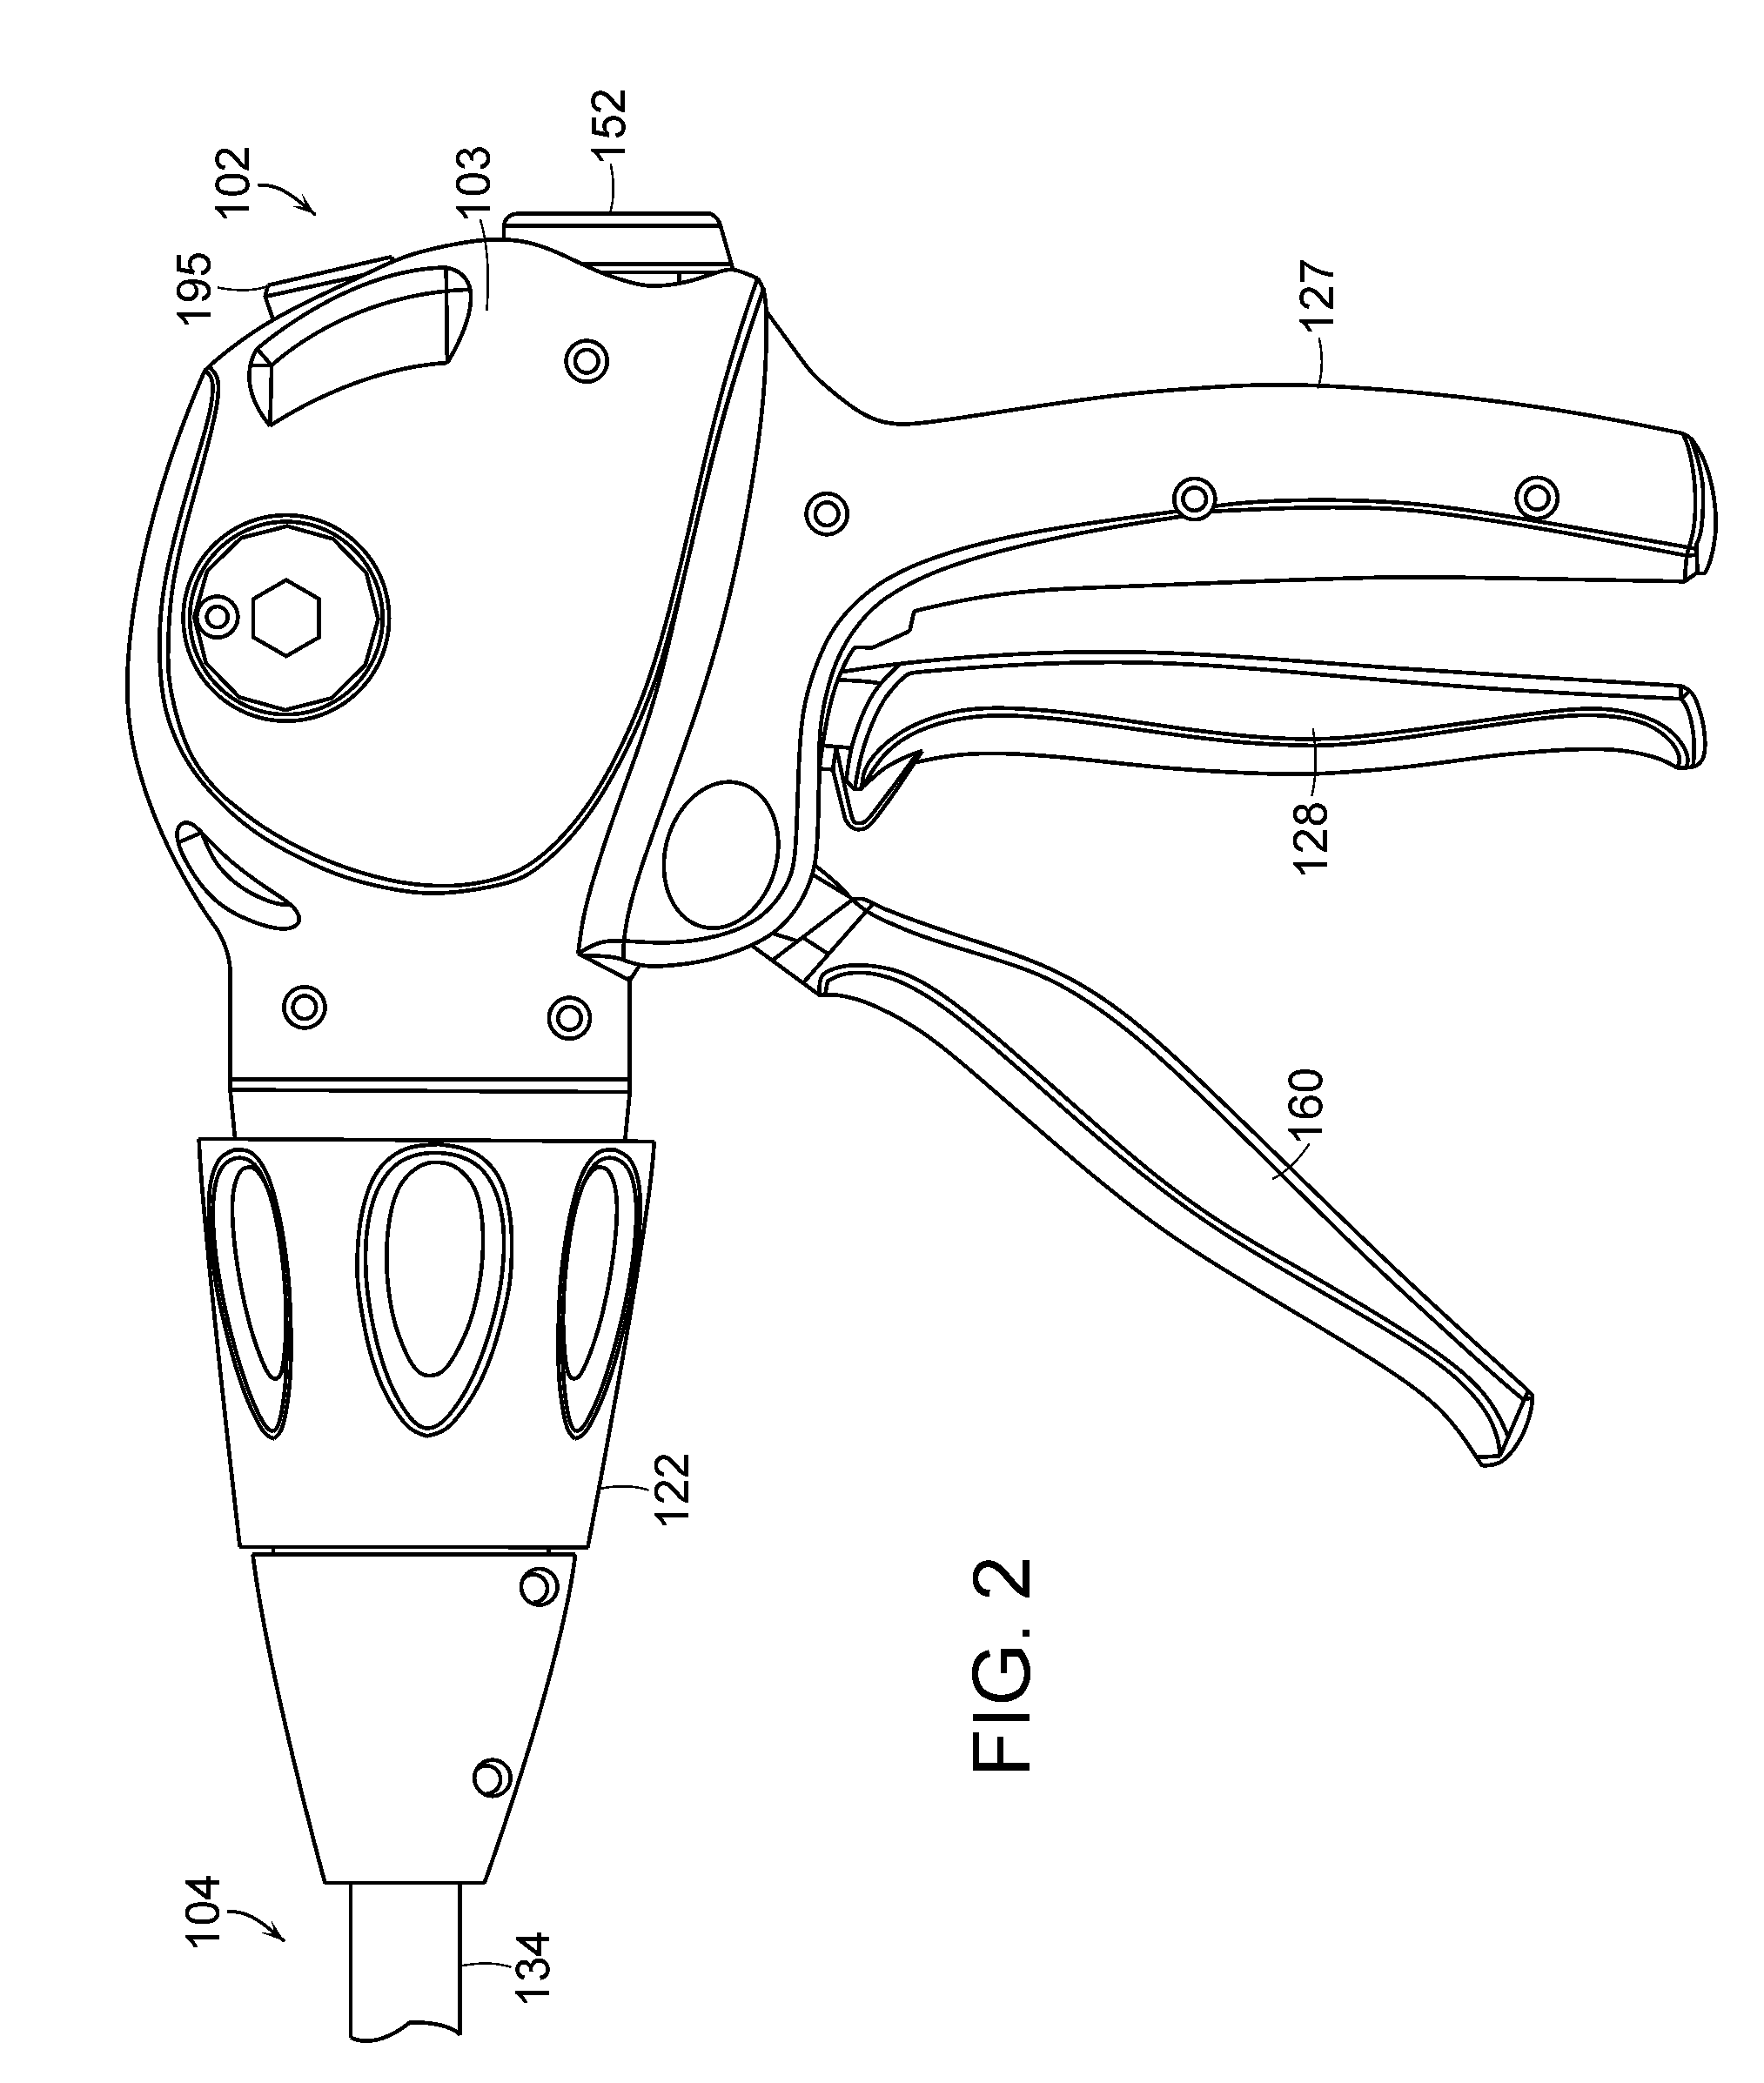 Surgical stapling instrument with an artculating end effector